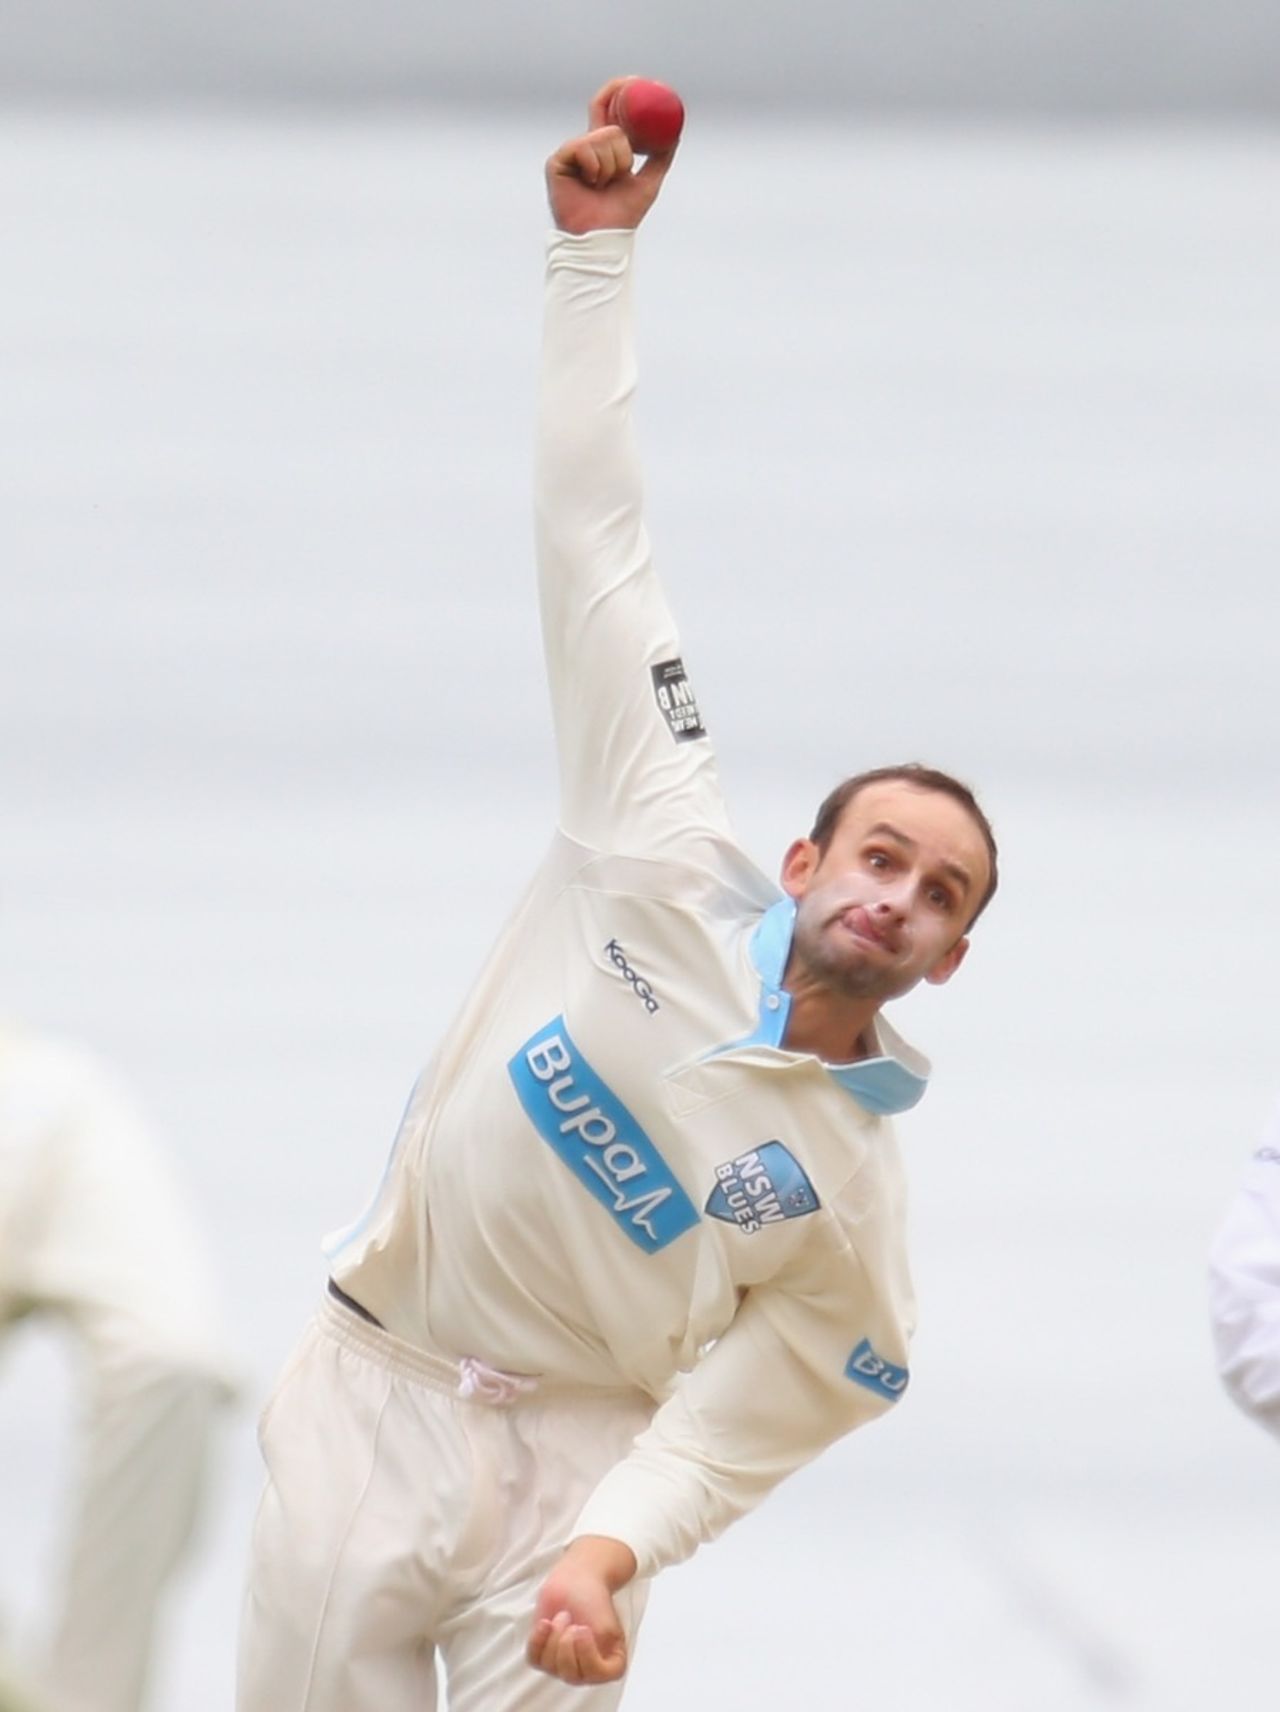 Nathan Lyon sends down a delivery, Victoria v New South Wales, Sheffield Shield, Melbourne, 3rd day, November 8, 2013